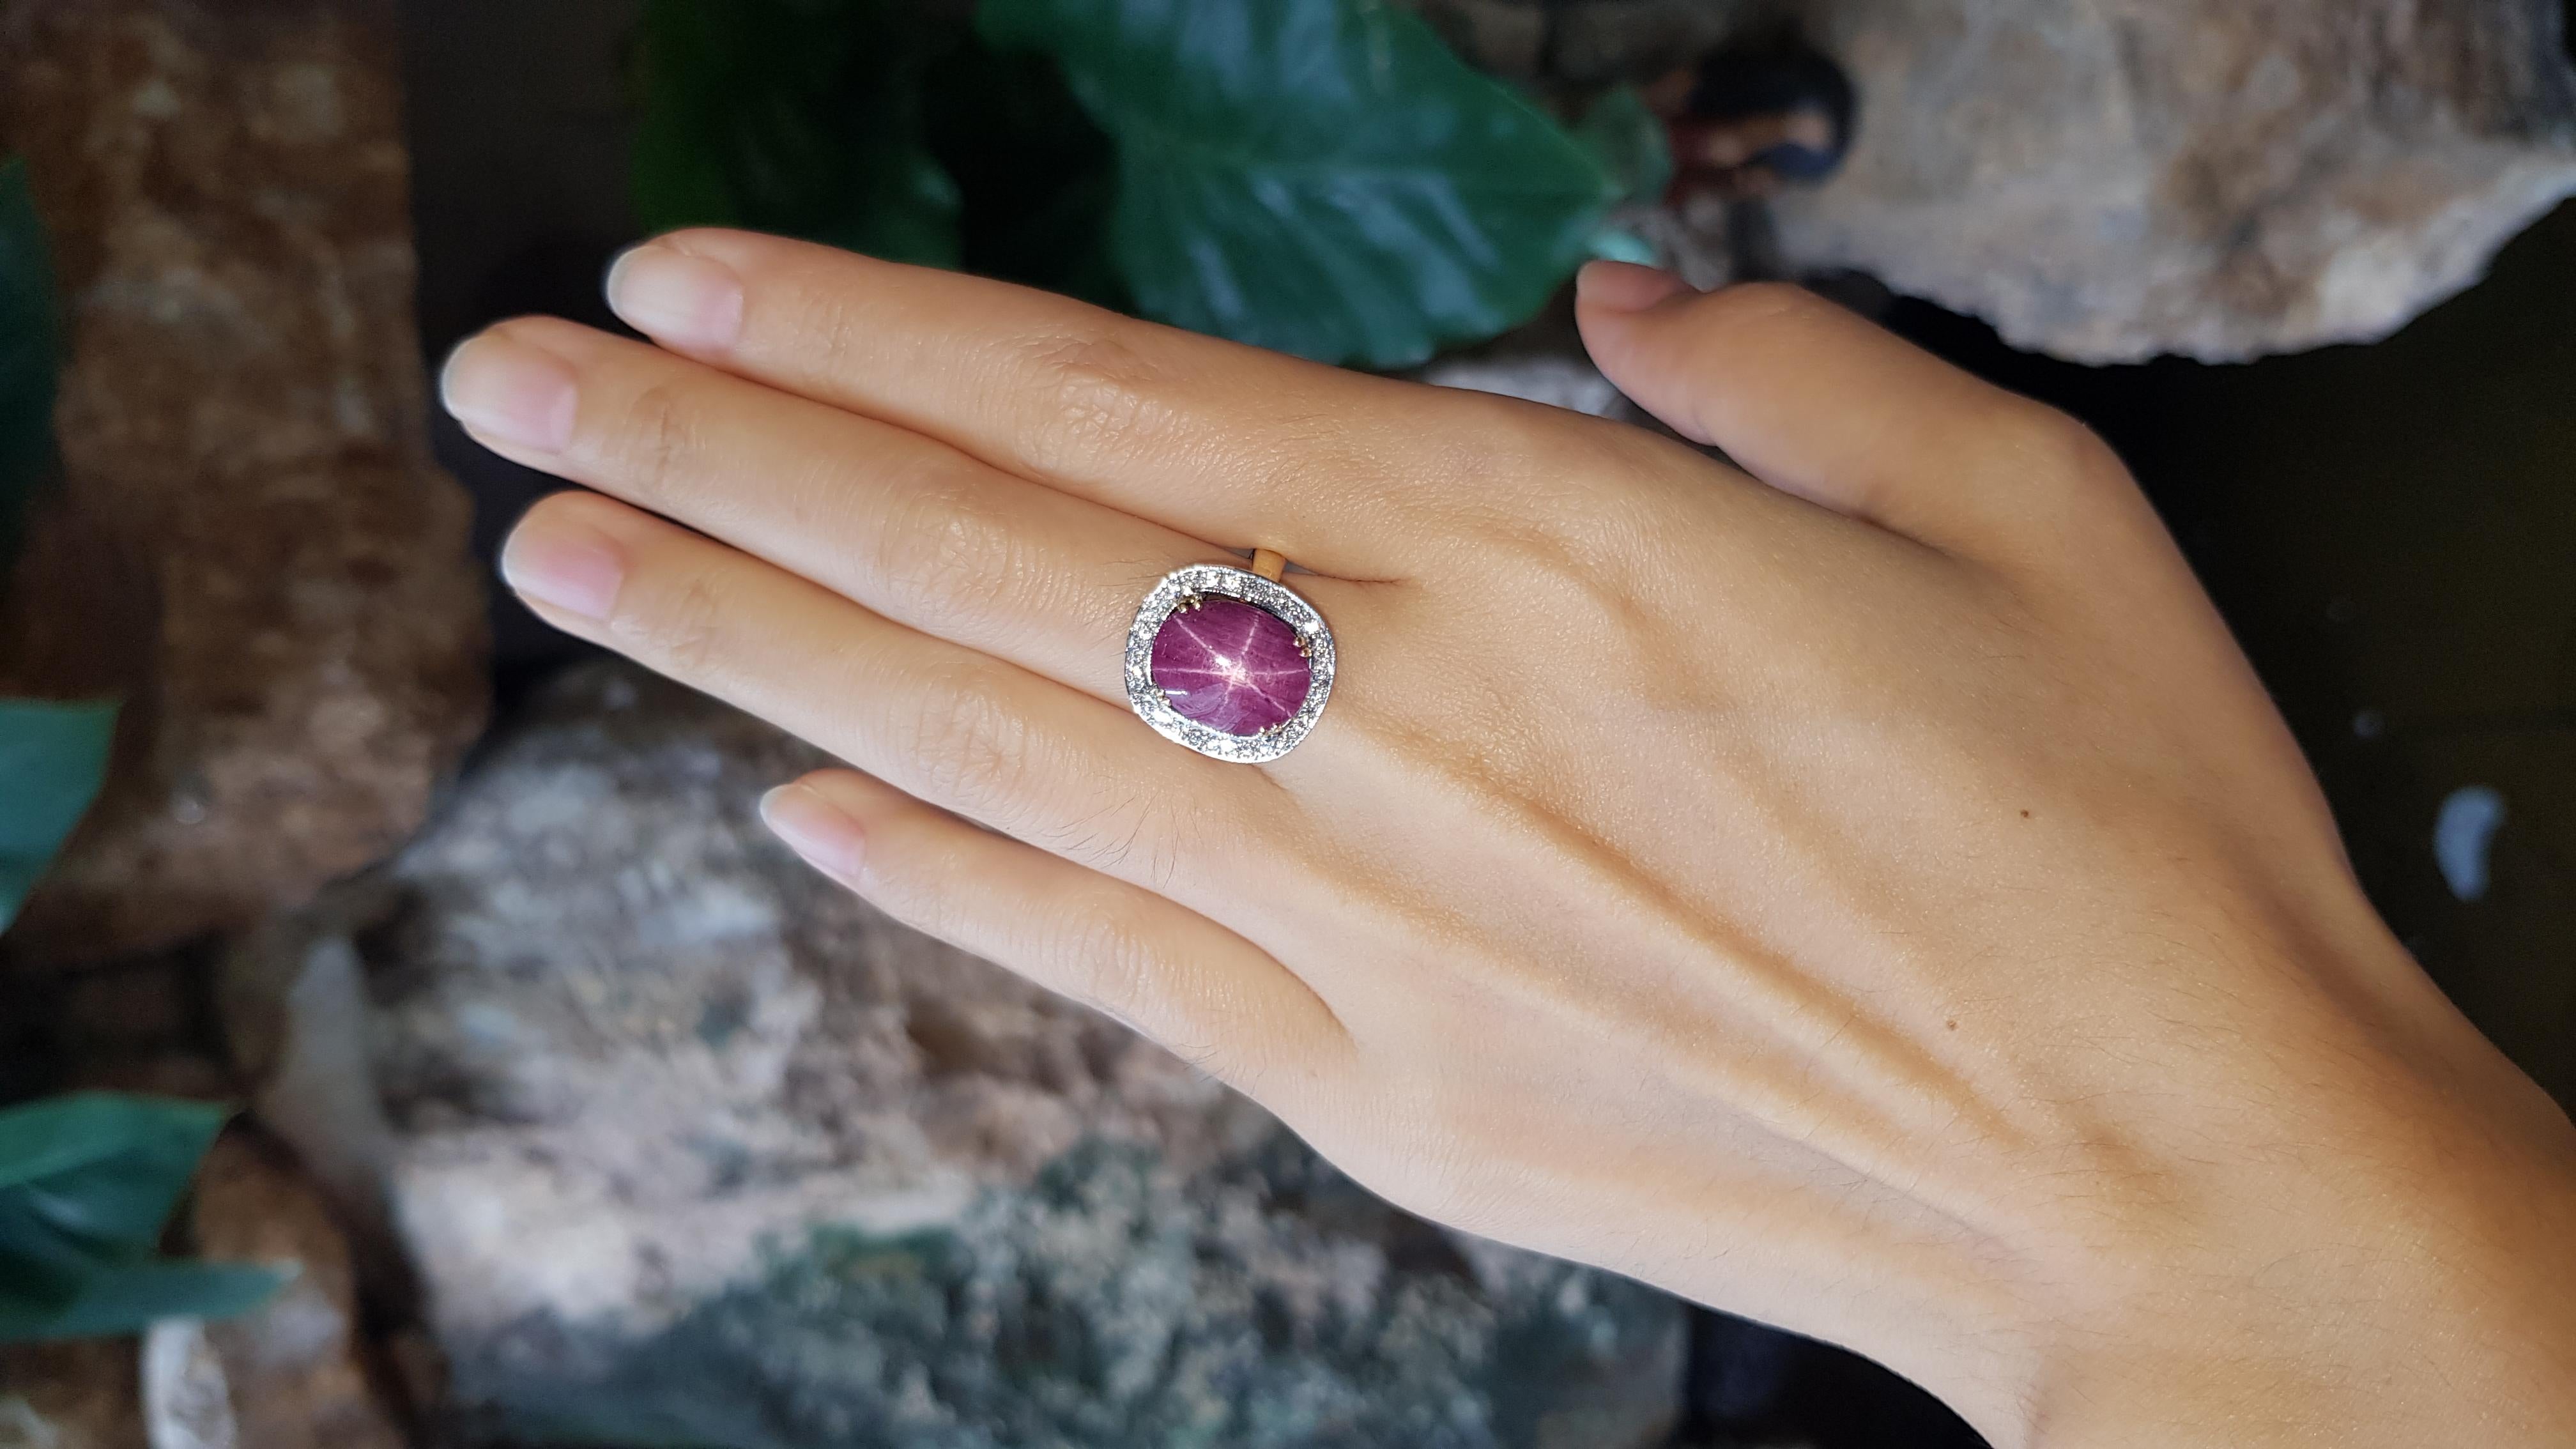 Star Ruby 10.26 carats with Diamond 0.50 carat Ring set in 18 Karat Gold Settings

Width:  1.5 cm 
Length: 1.7 cm
Ring Size: 51
Total Weight: 11.76 grams

